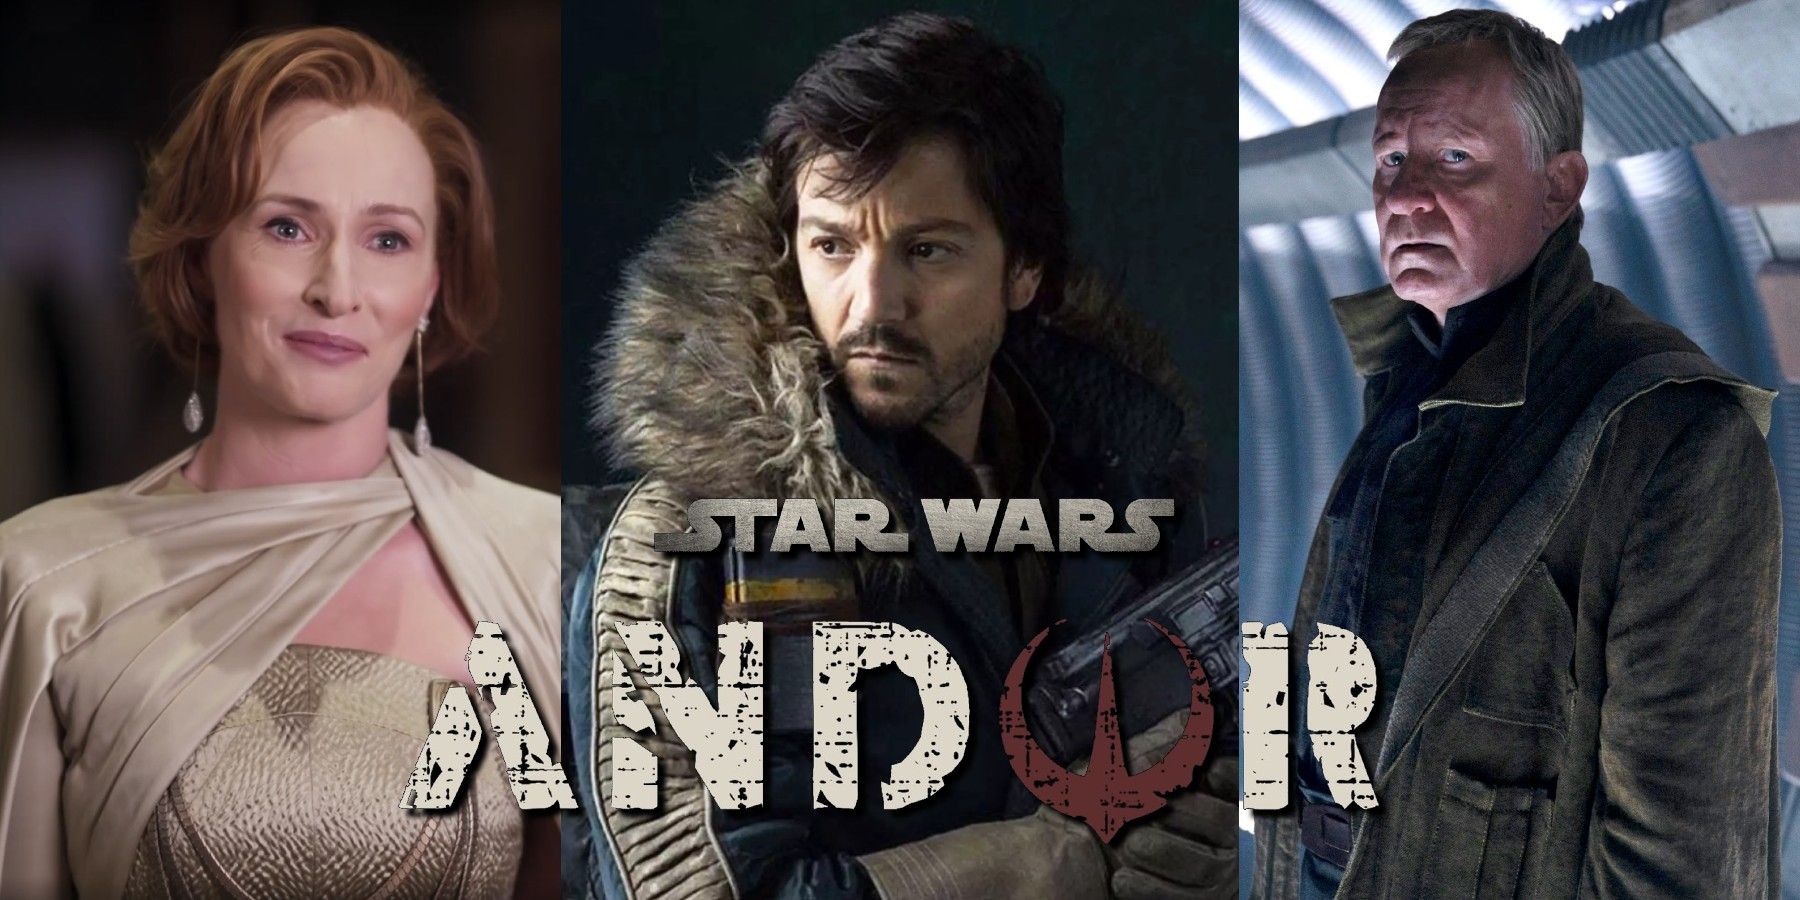 Star Wars: Andor Showcases 10 Main Characters on New Poster